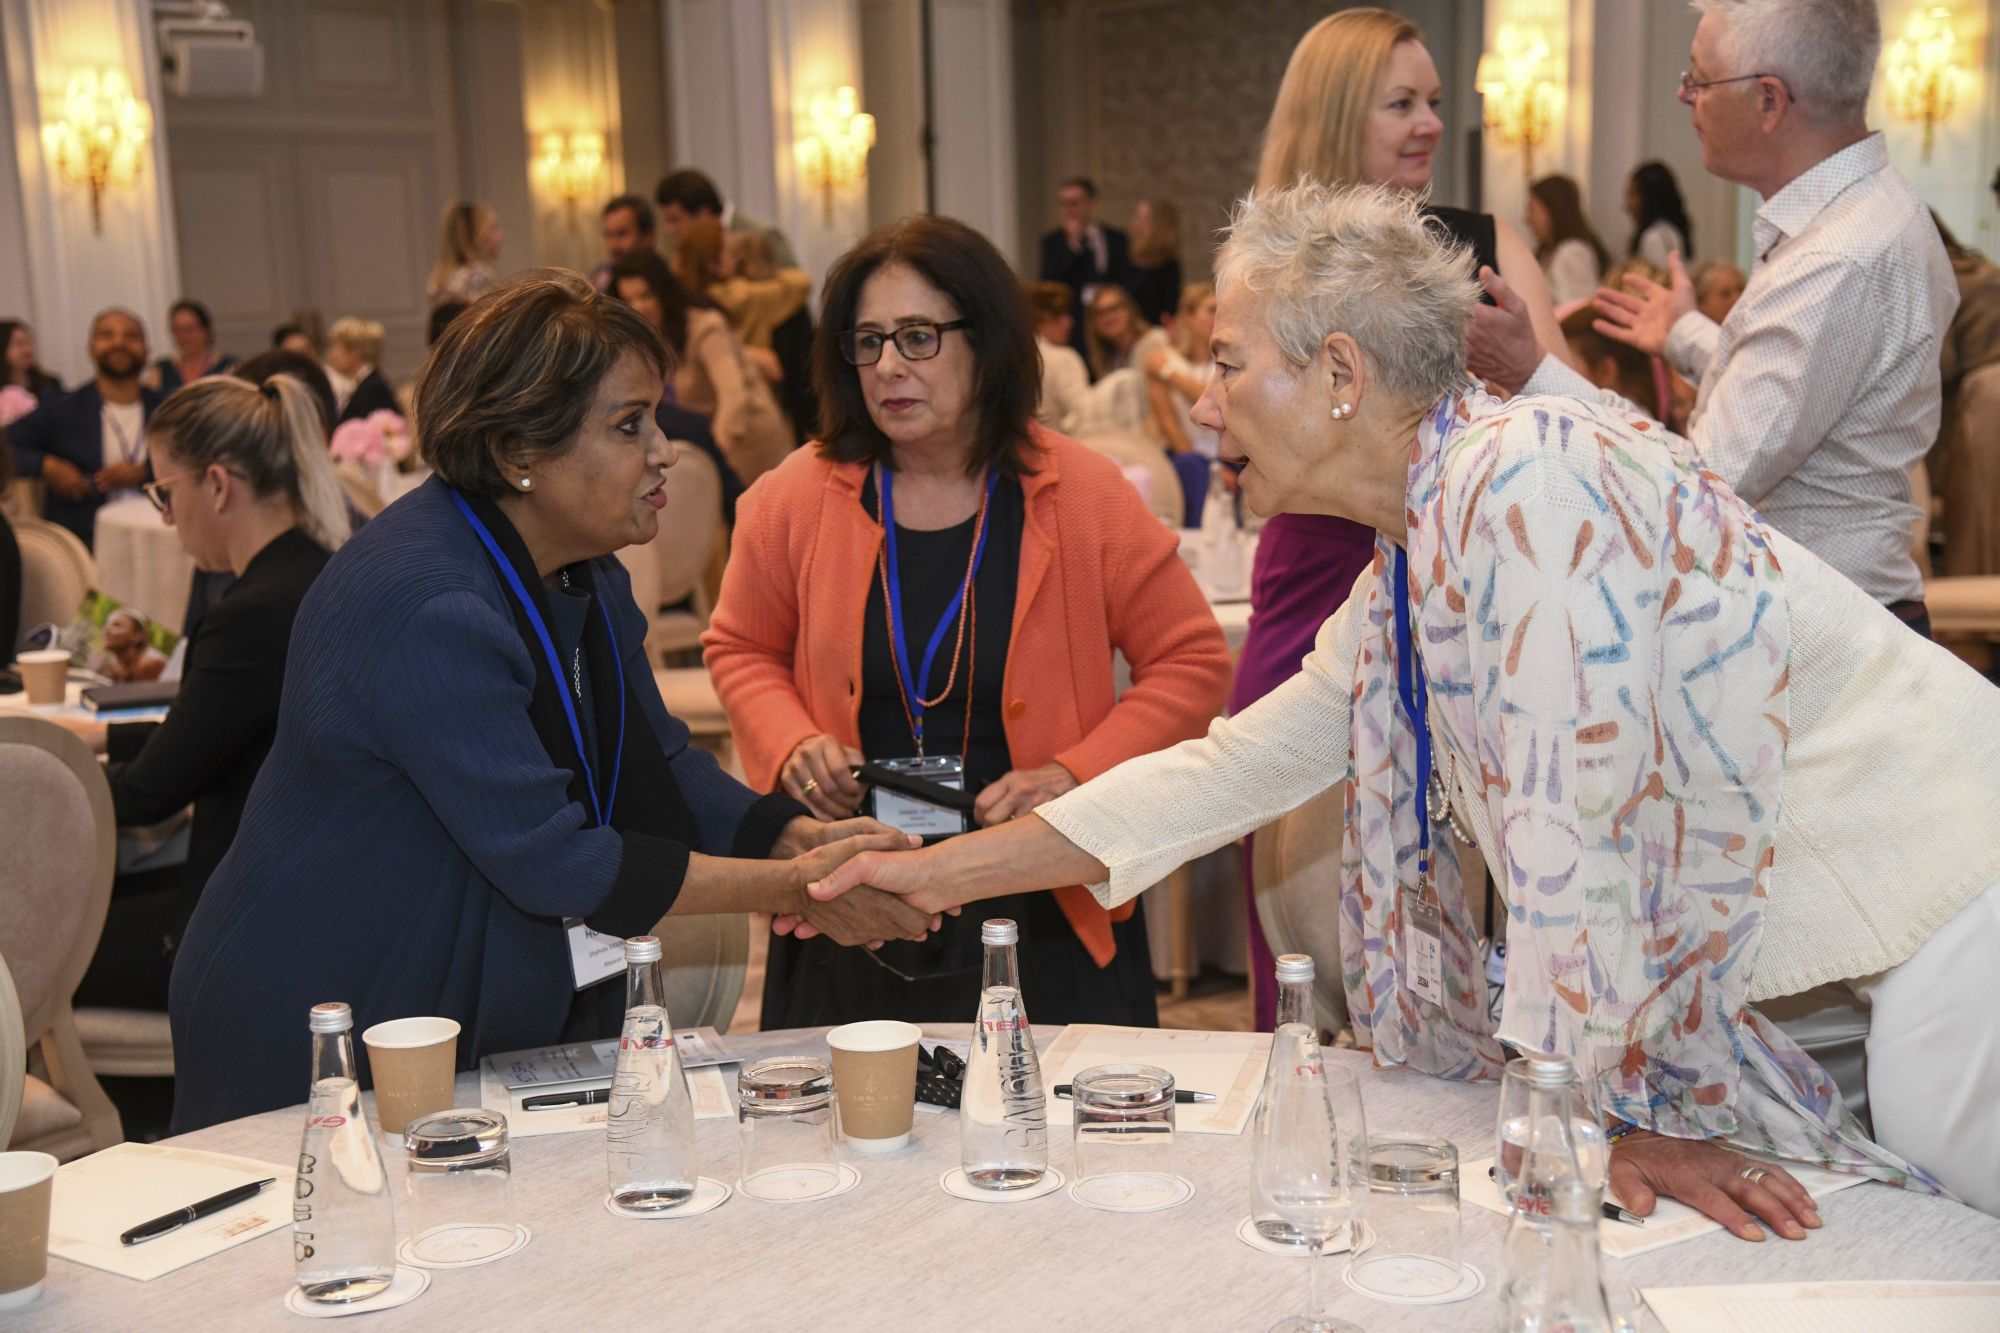 Three women greet each other across a table in a conference hall